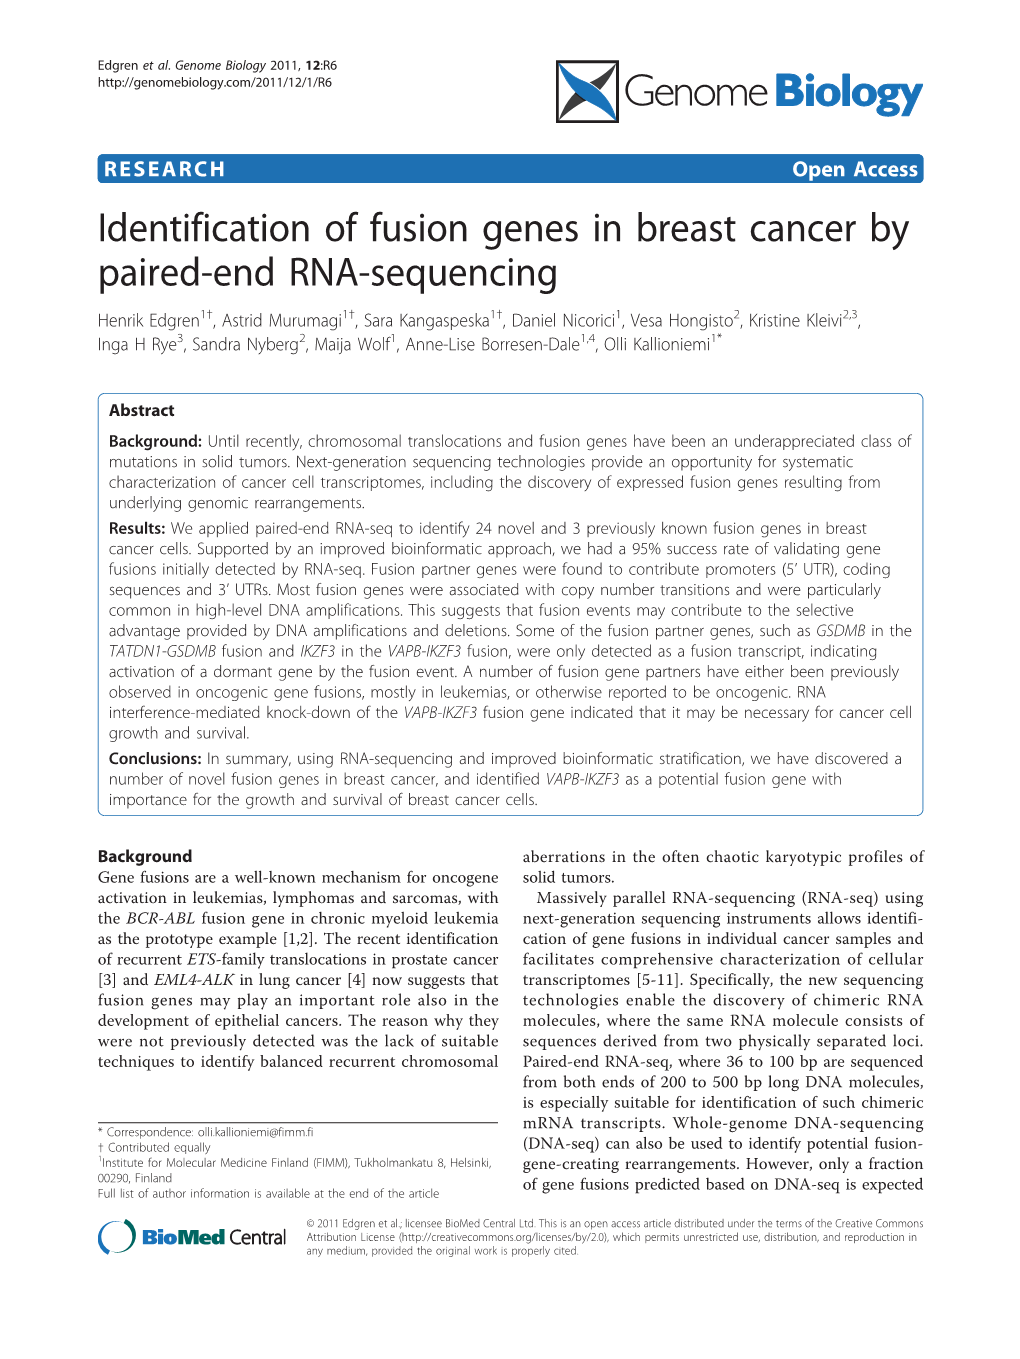 Identification of Fusion Genes in Breast Cancer by Paired-End RNA